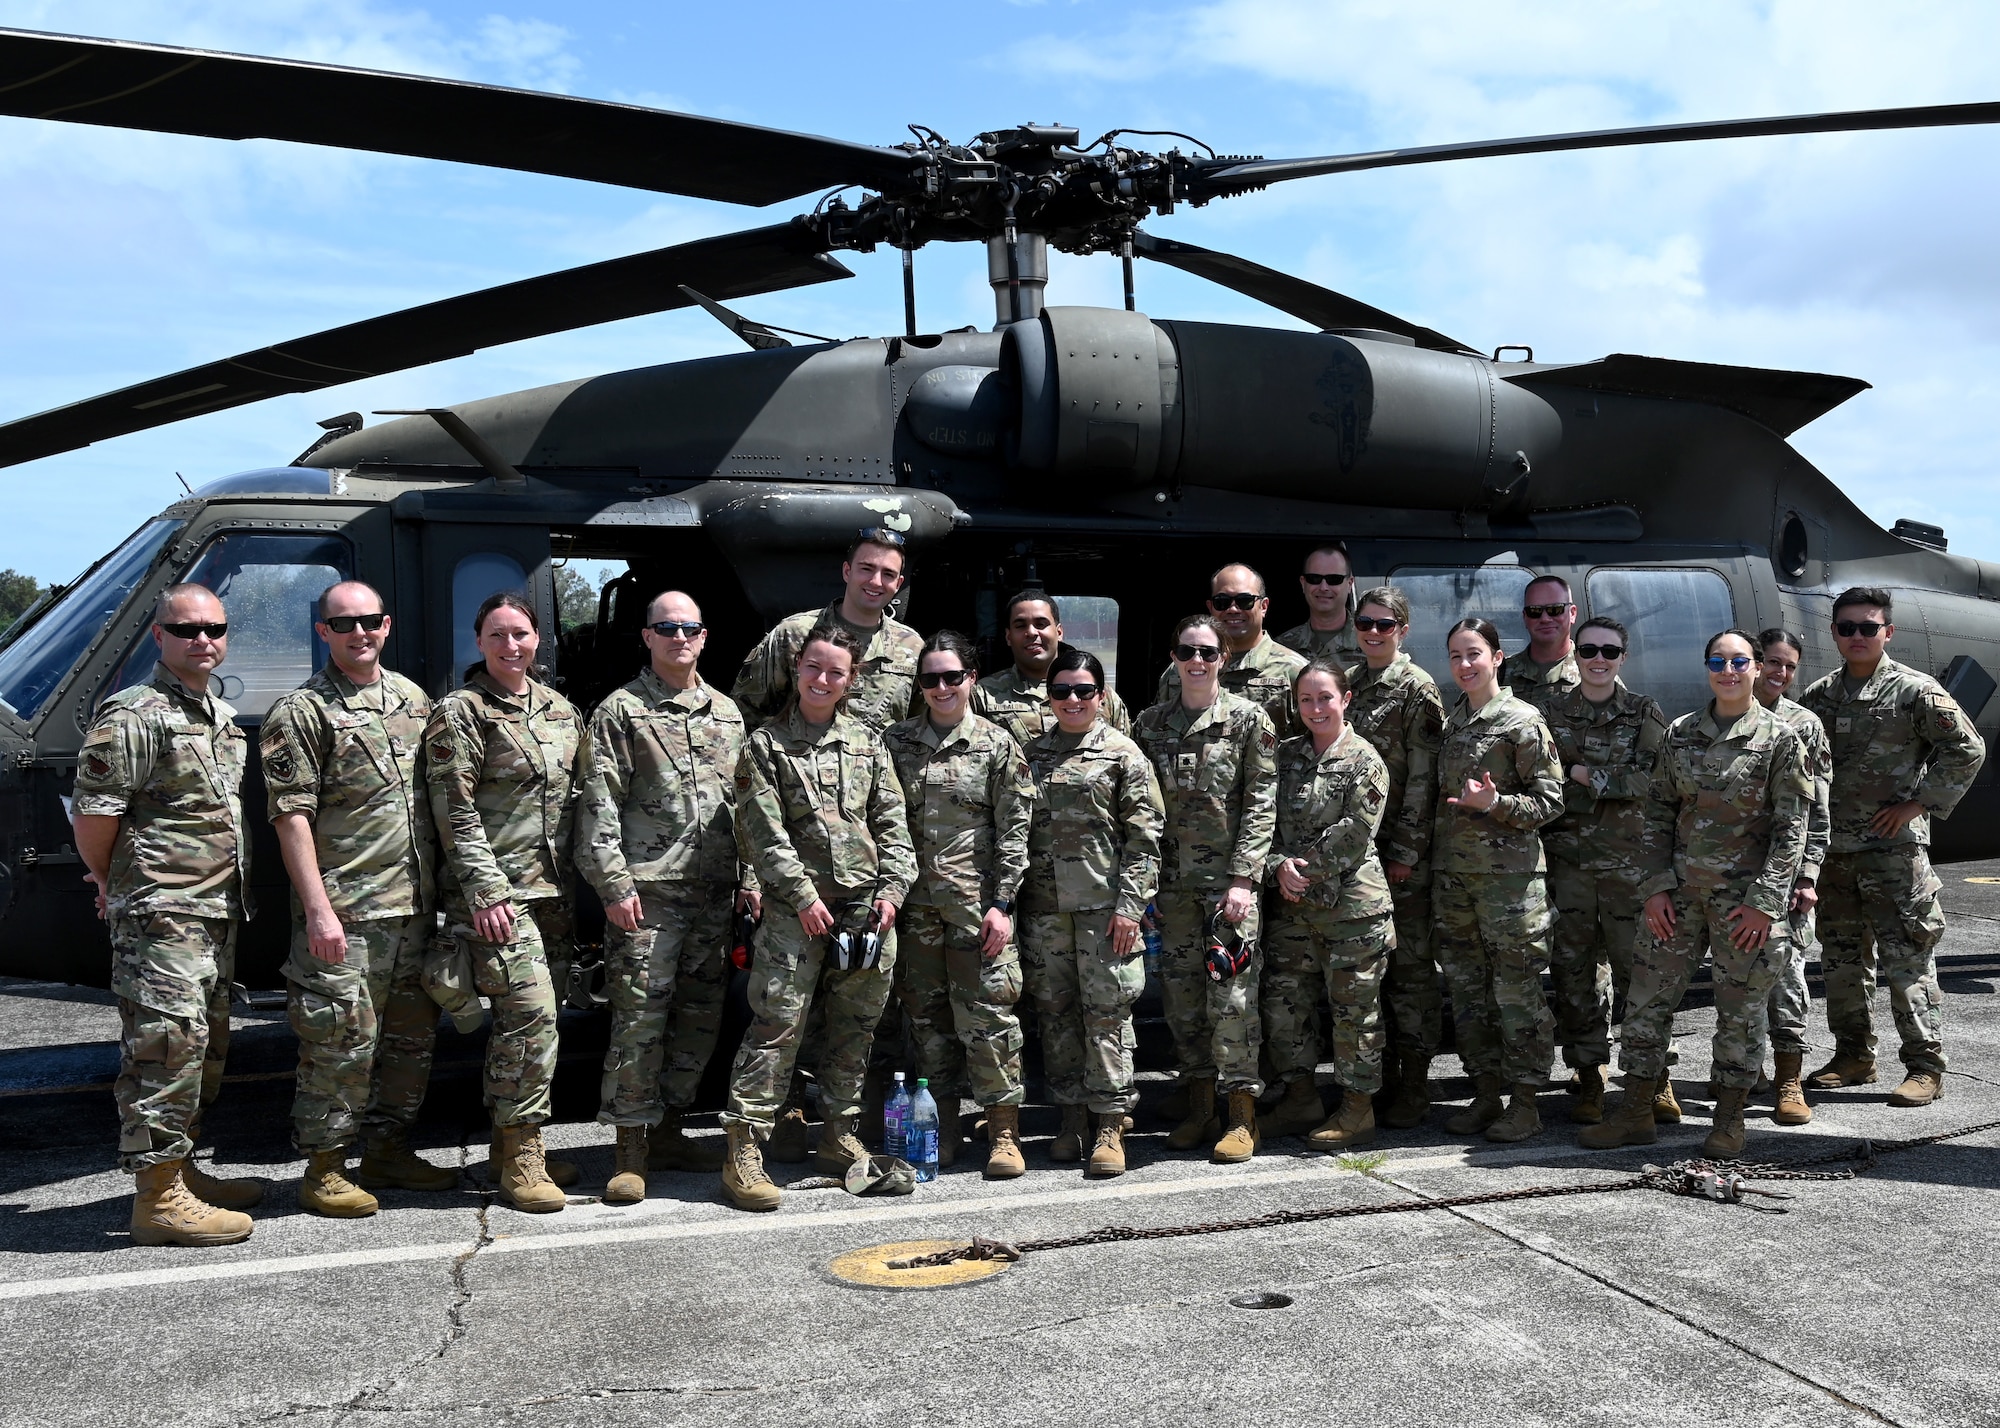 Members from the 104th Medical Group stand in front of an Army UH-60 Black Hawk helicopter before a morale flight at Wheeler Army Airfield, Hawaii, May 3, 2022. Airmen are in Hawaii to complete training requirements at Tripler Army Medical Center. (U.S. Air National Guard Photo by Senior Airman Camille Lienau)